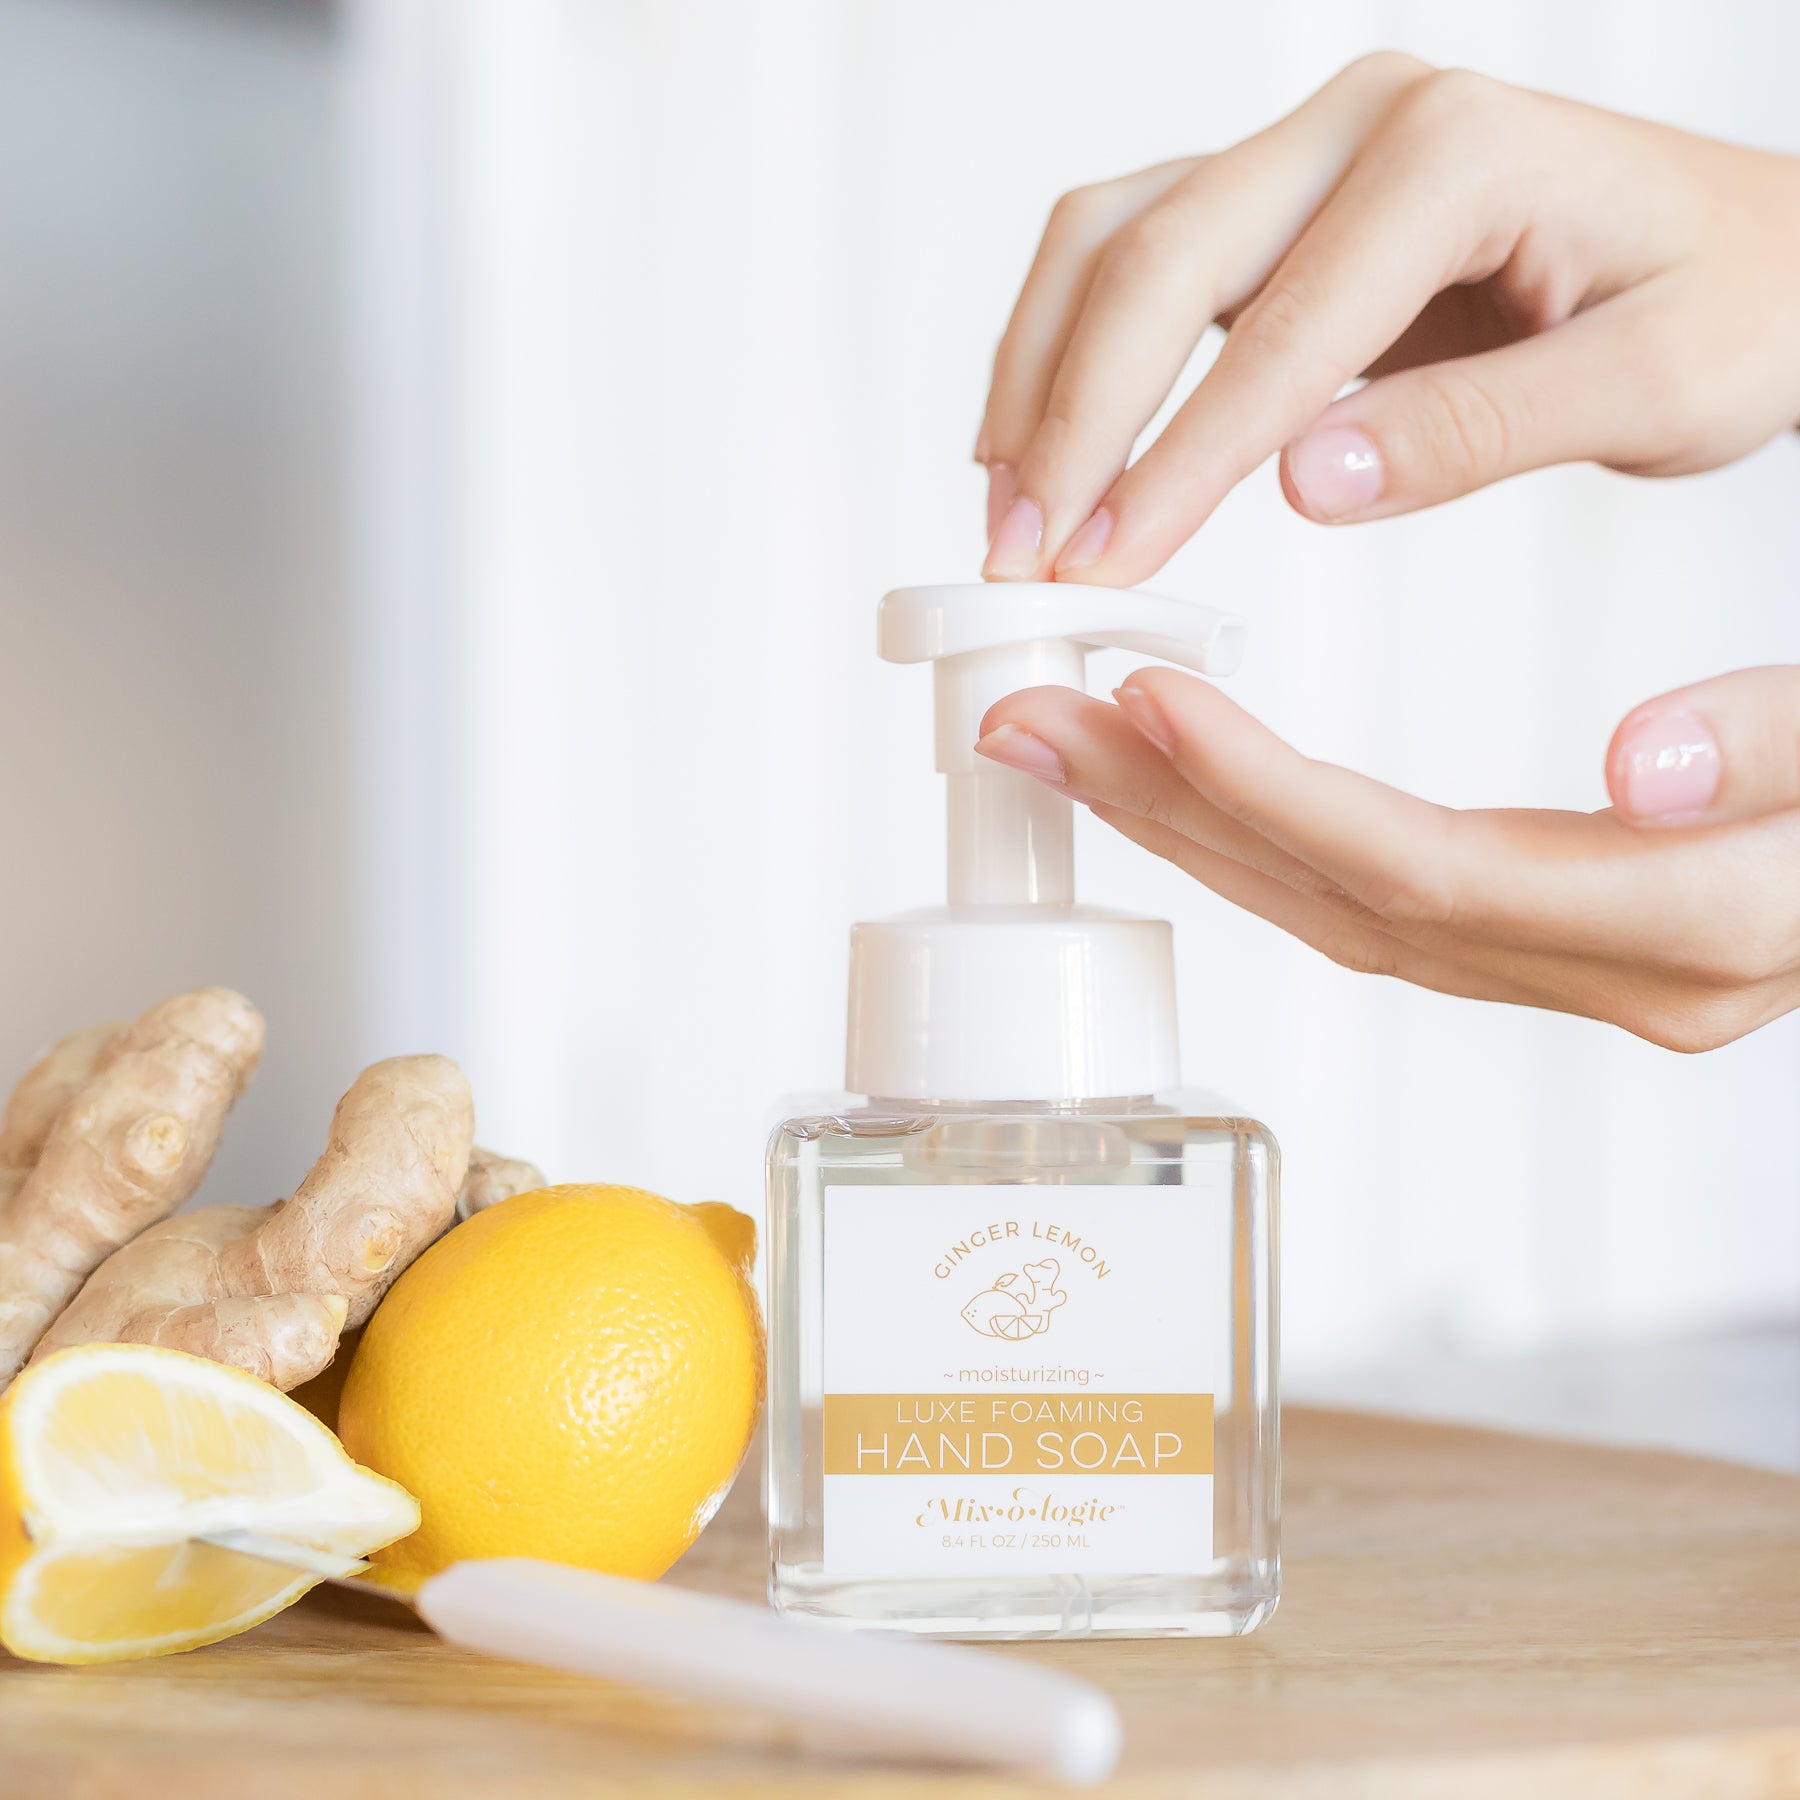 Moisturizing Luxe Foaming Hand Soap in Mixologie’s Ginger Lemon scent. Clear glass square shaped container with white pump that contains 8.4 fl oz or 250 ML of clear liquid. Pictured on a cutting board with lemons and ginger and a models hands.